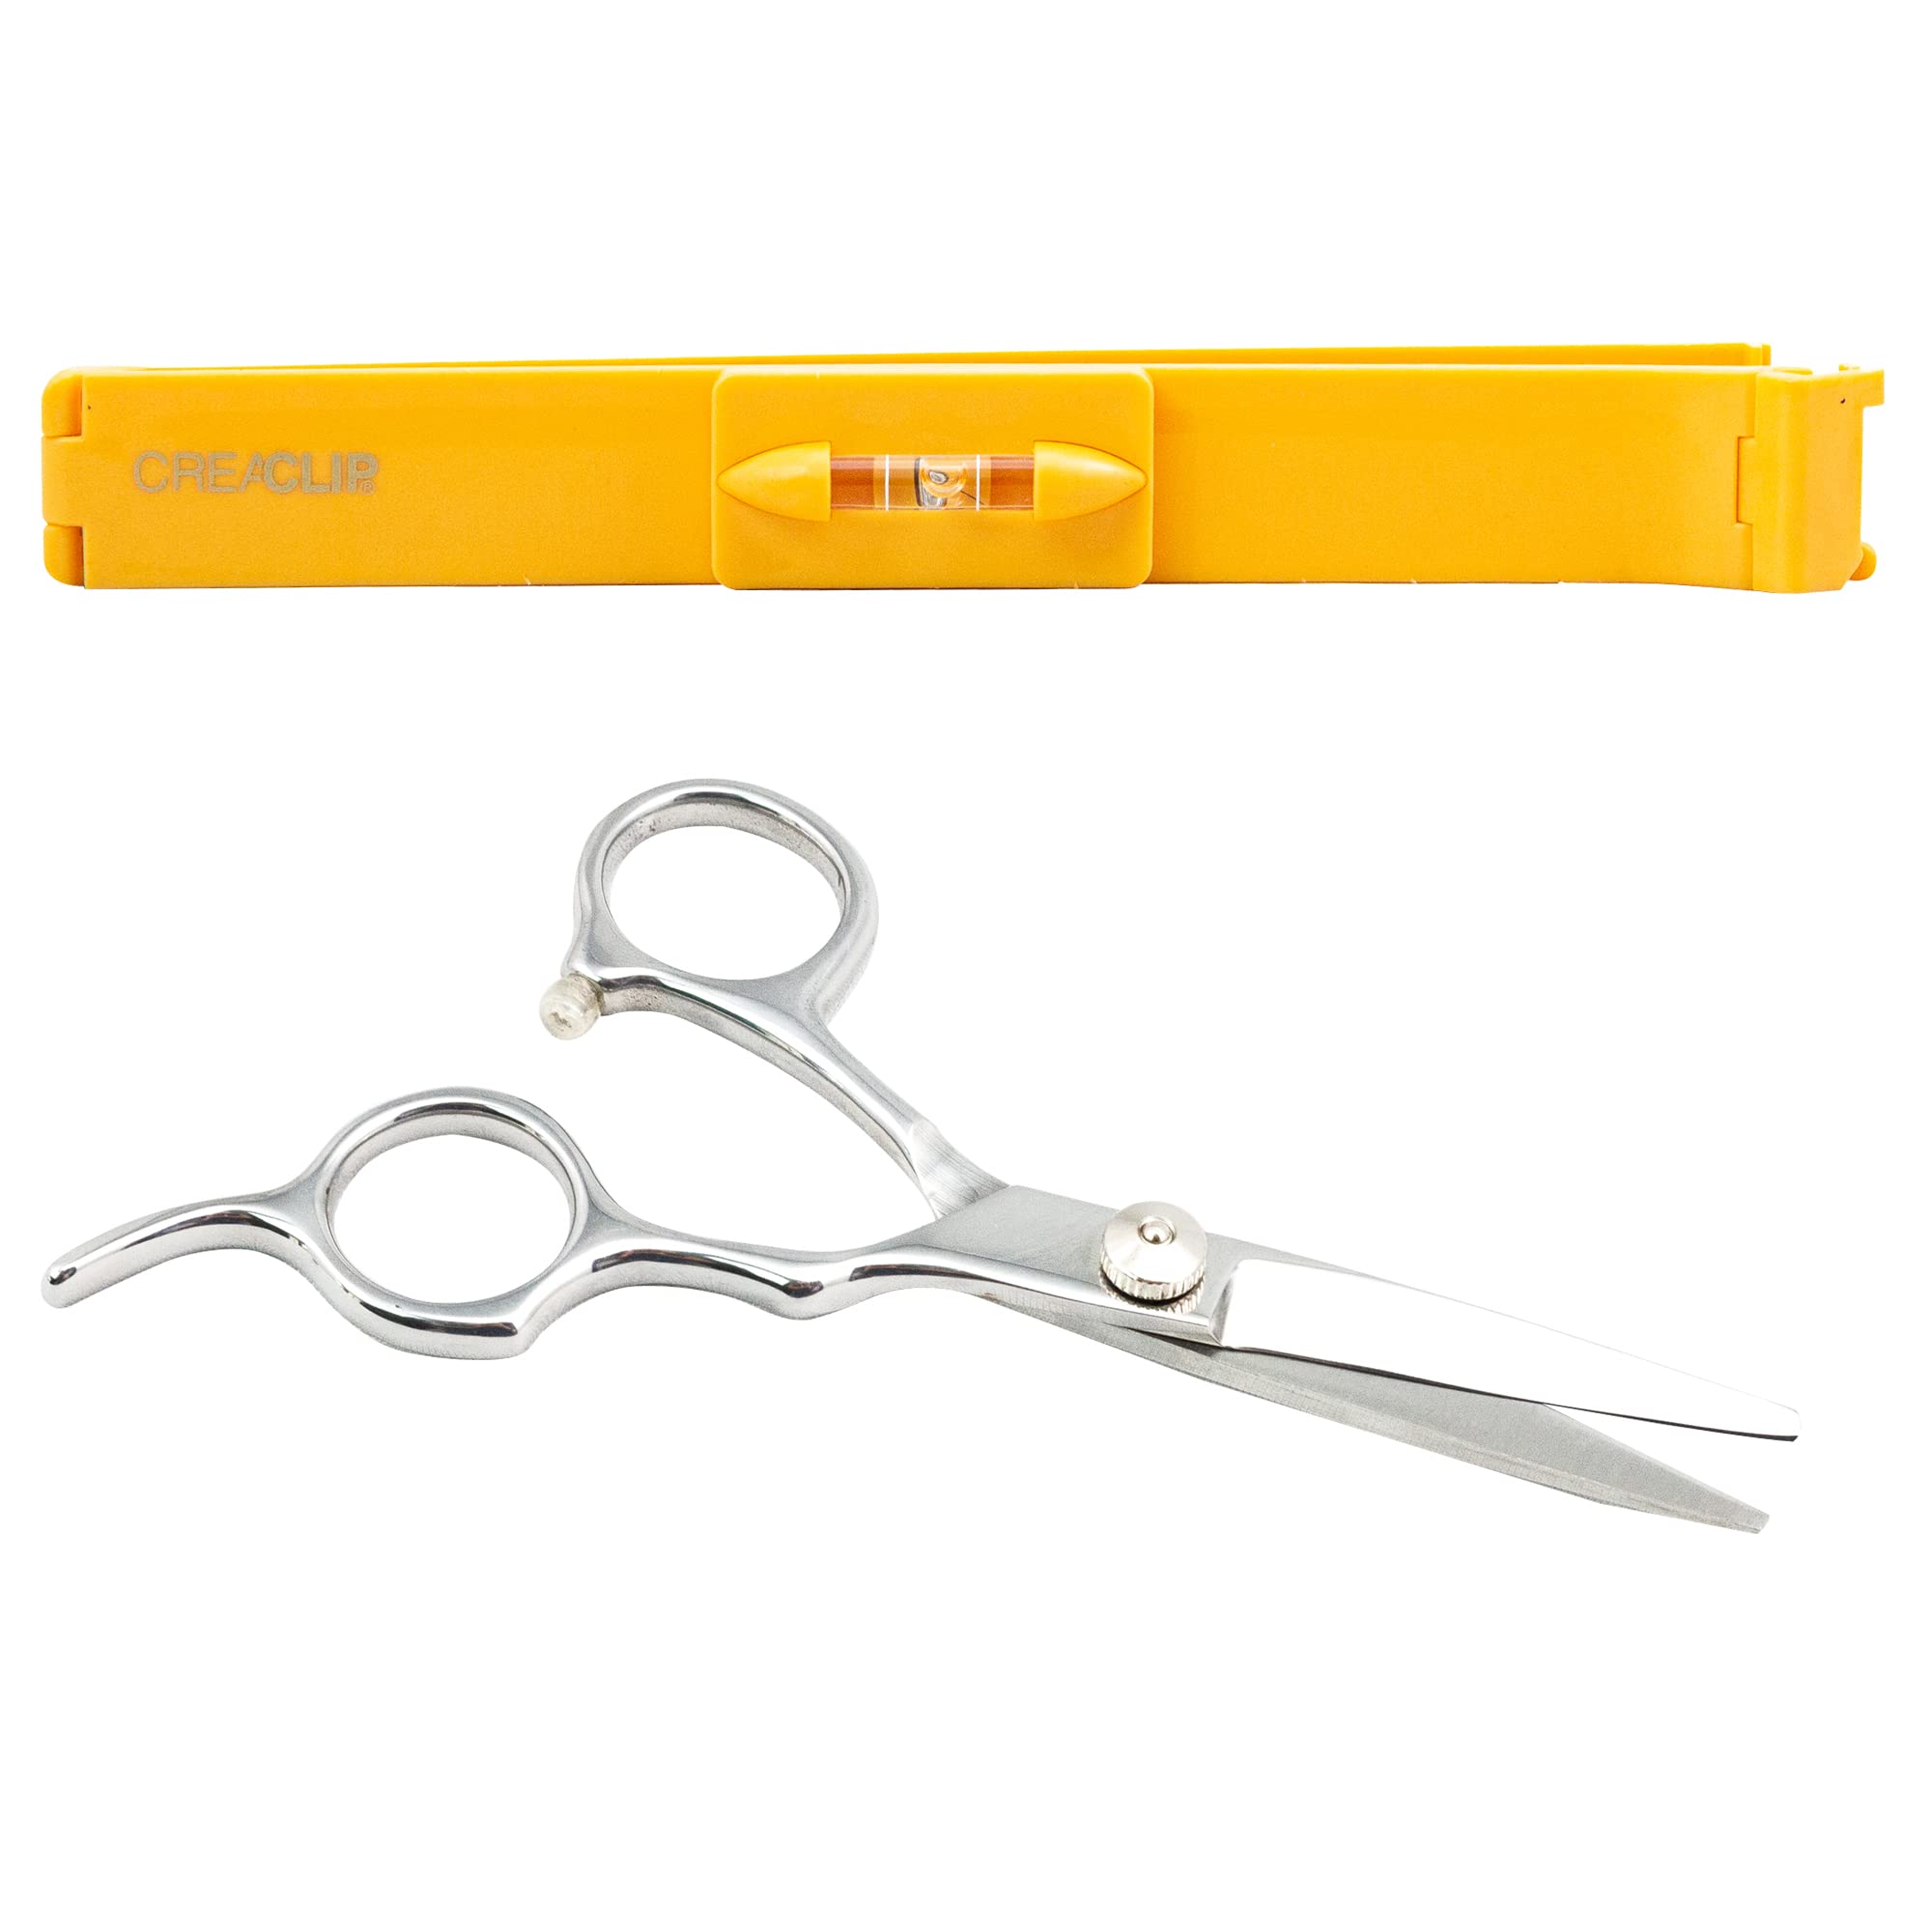 Kids Scissors/Cutter: Buy Safety Scissors & Cutters for Kids Online India 